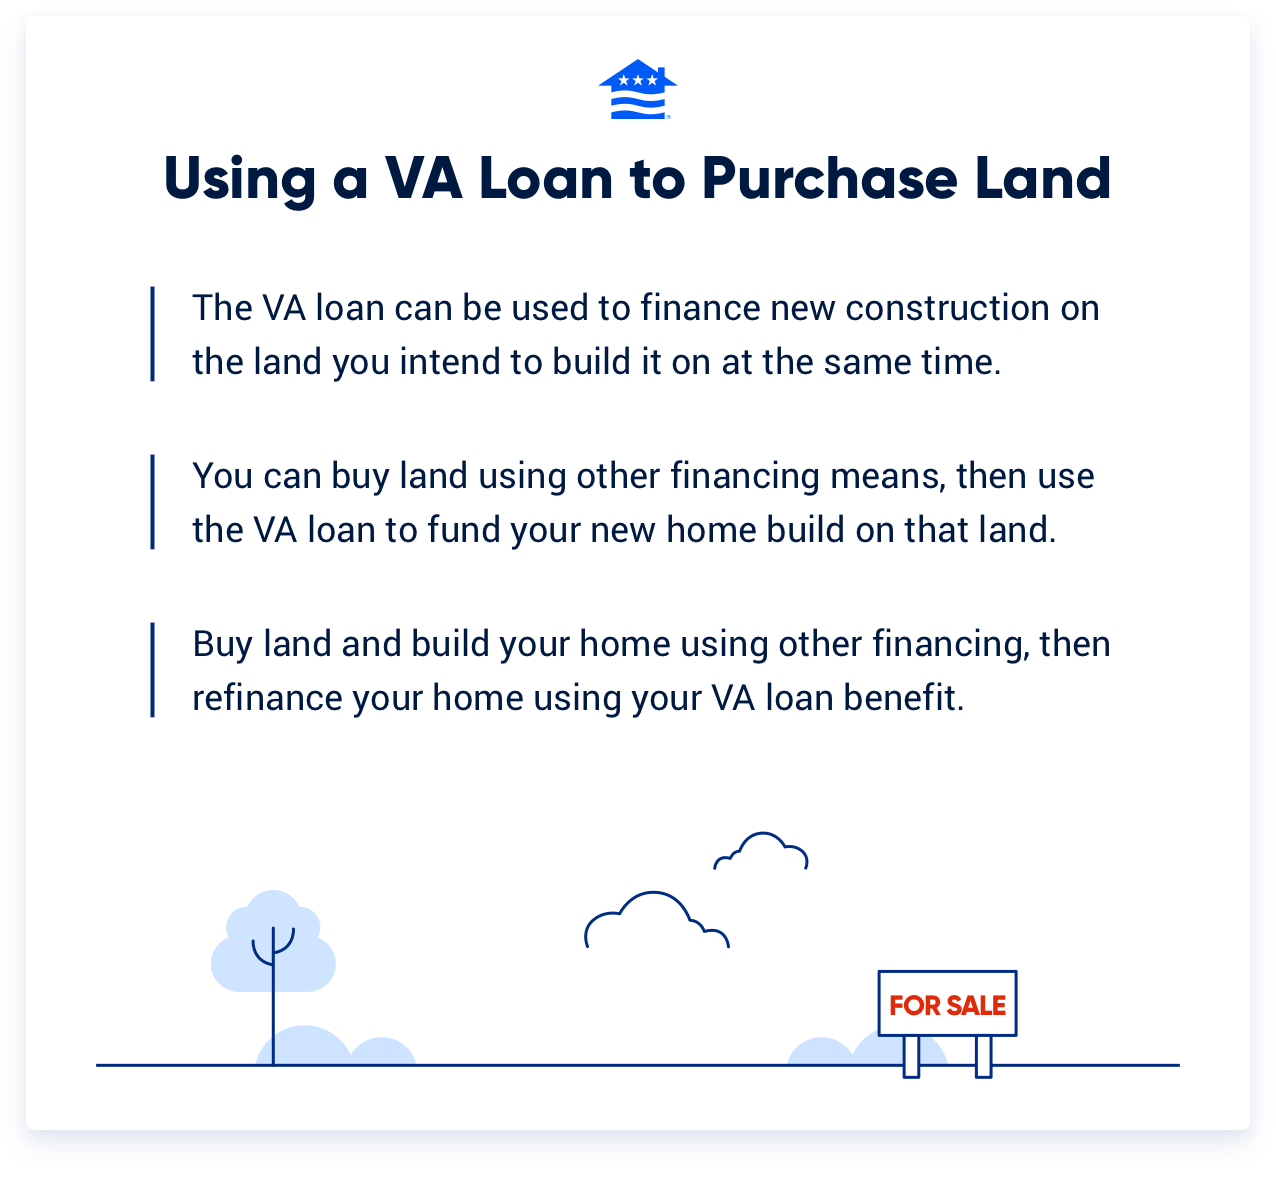 VA loans can be used in a few different ways when it comes to financing the purchase of land and a new home. 